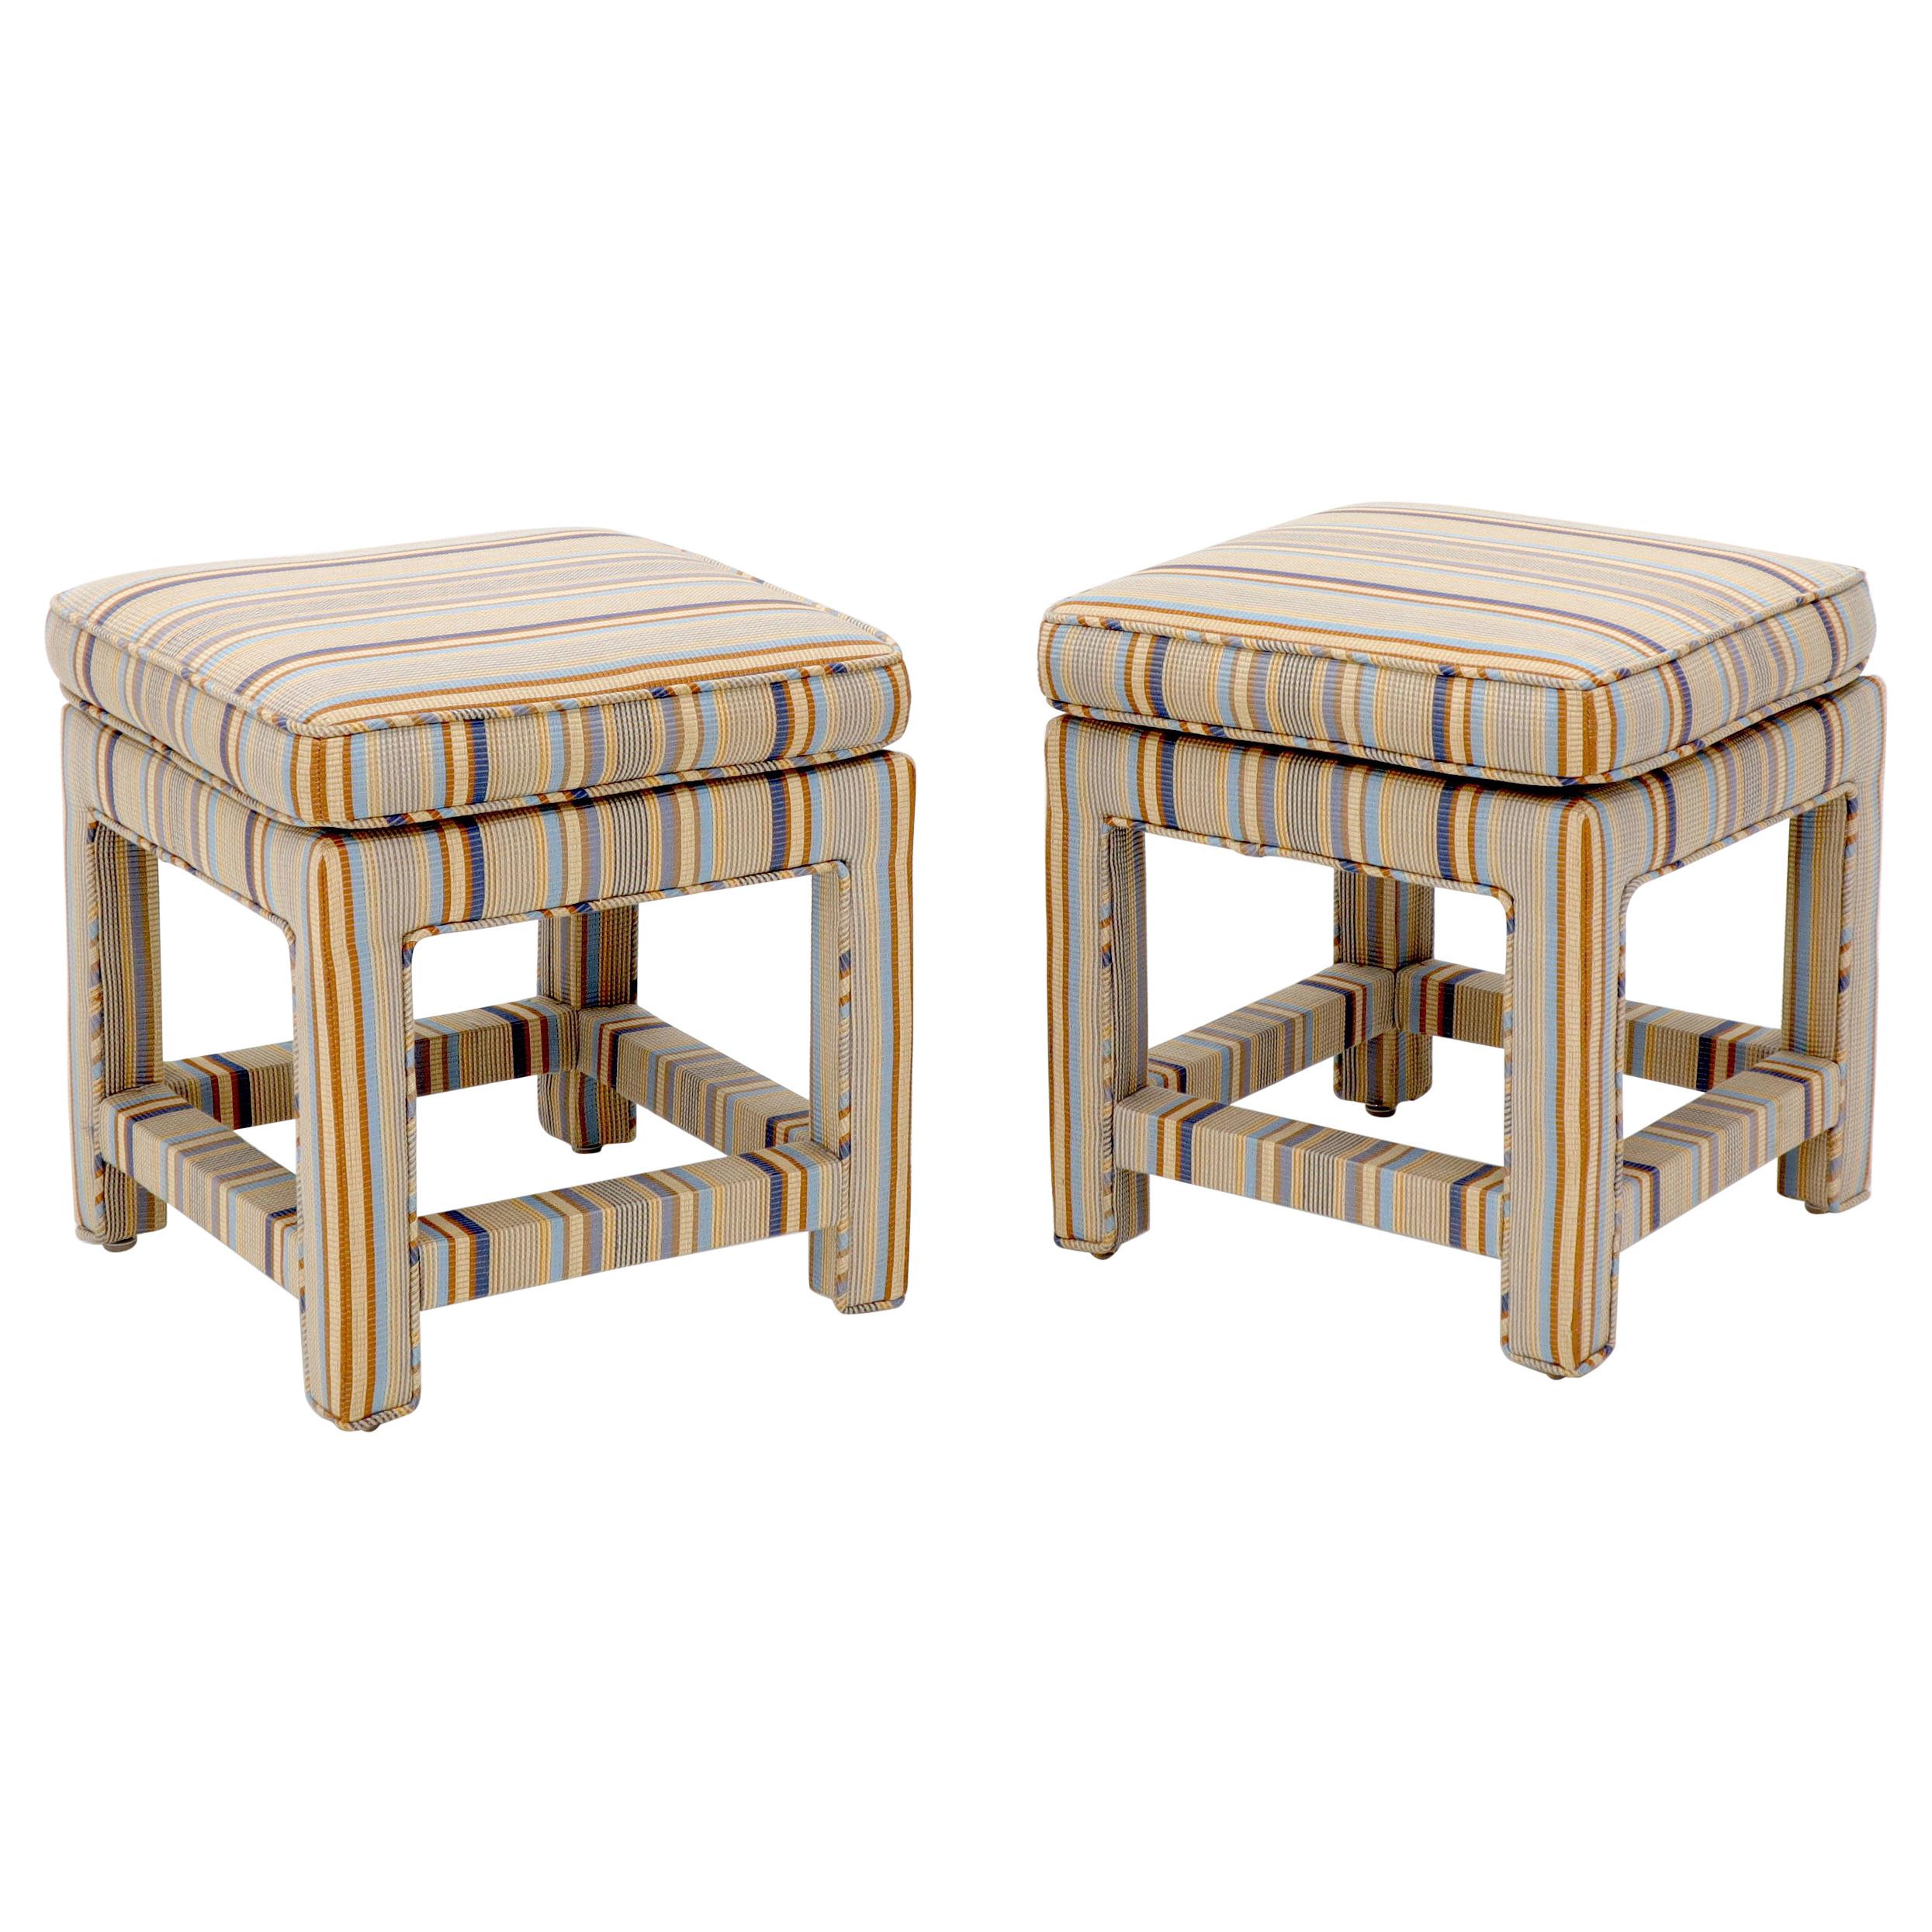 Pair of Upholstered Square Billy Baldwin Benches